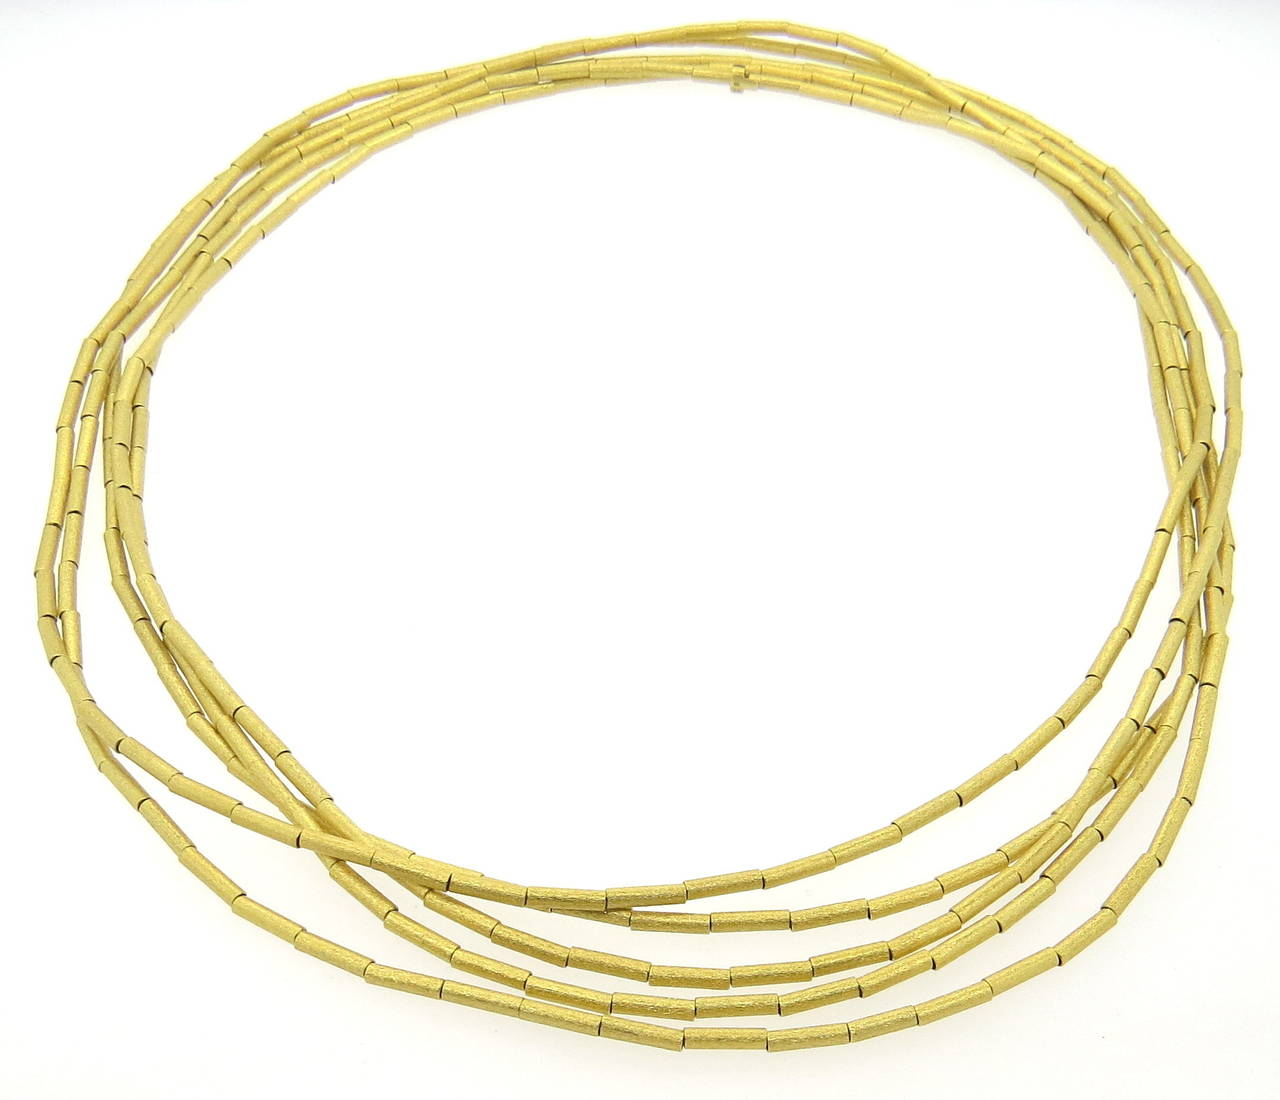 18k gold barrel station chain necklace, crafted by H Stern, measuring 10 feet long and is 2.5mm in width. Marked with S mark and 750. Weight - 84.5 grams  Current retail is $17,400.